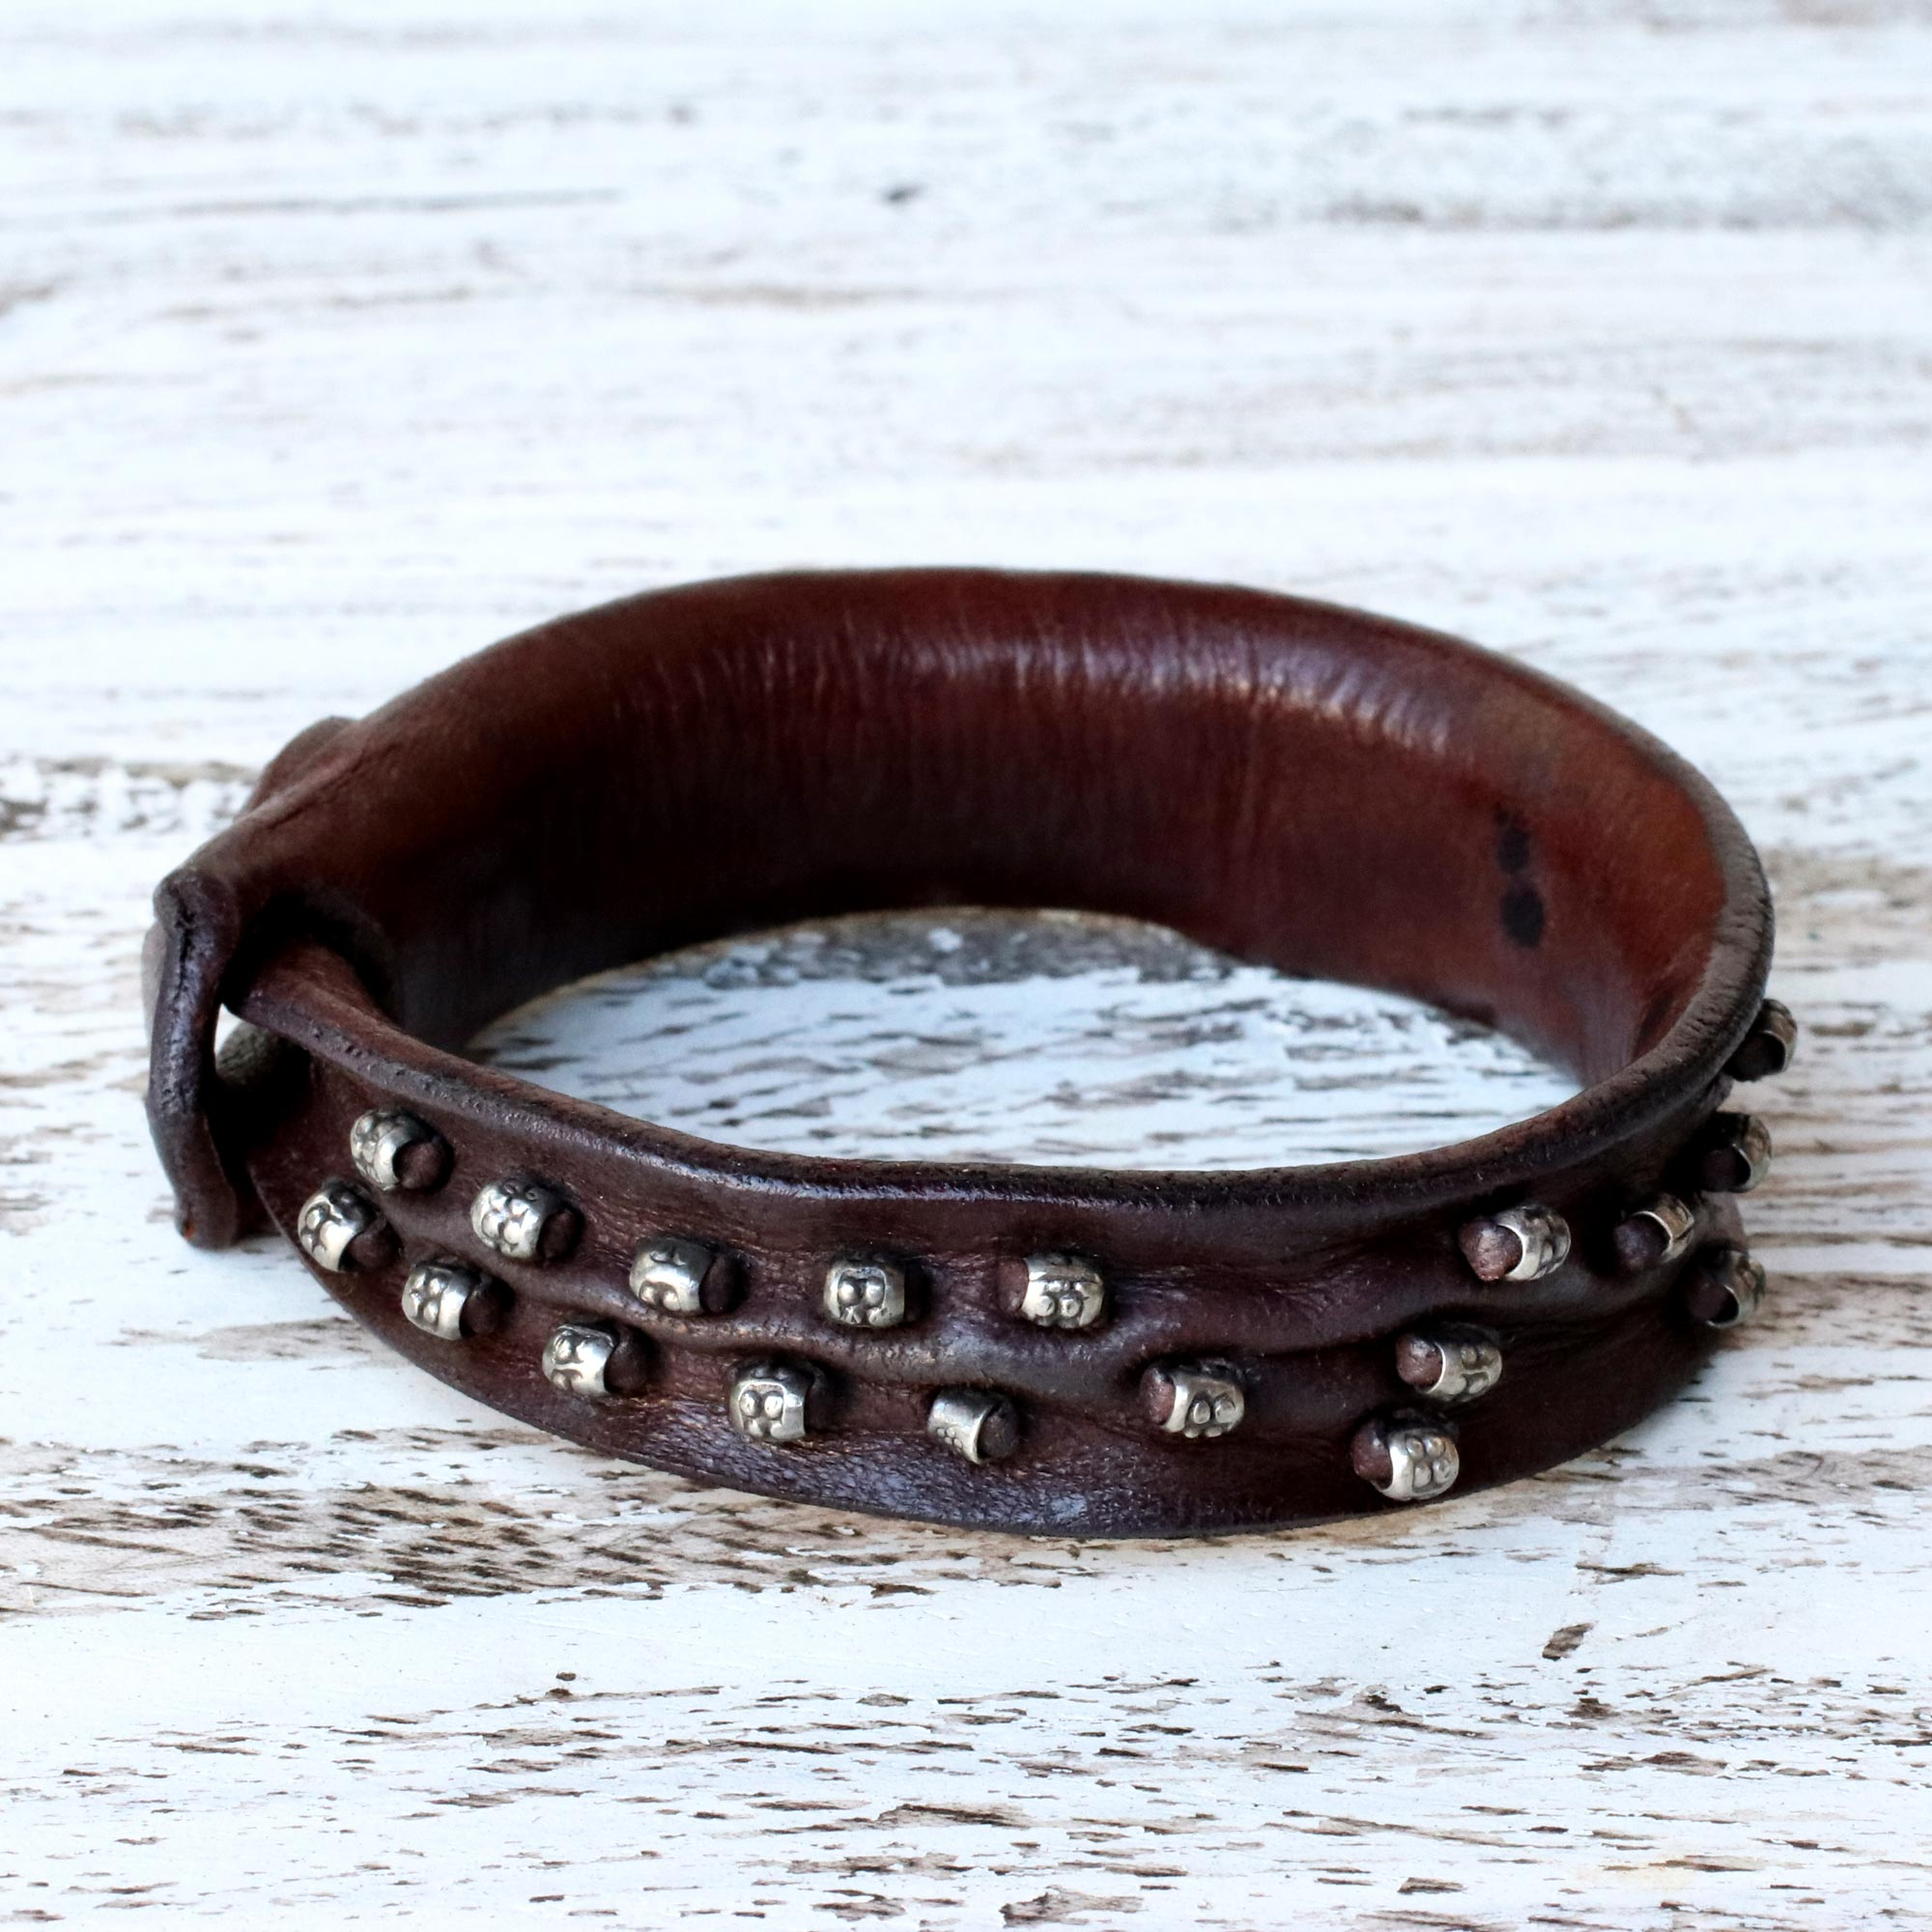 Mountain Rock' 7.5 NOVICA Leather Wristband Bracelet with .925 Sterling Silver Accents and Clasp